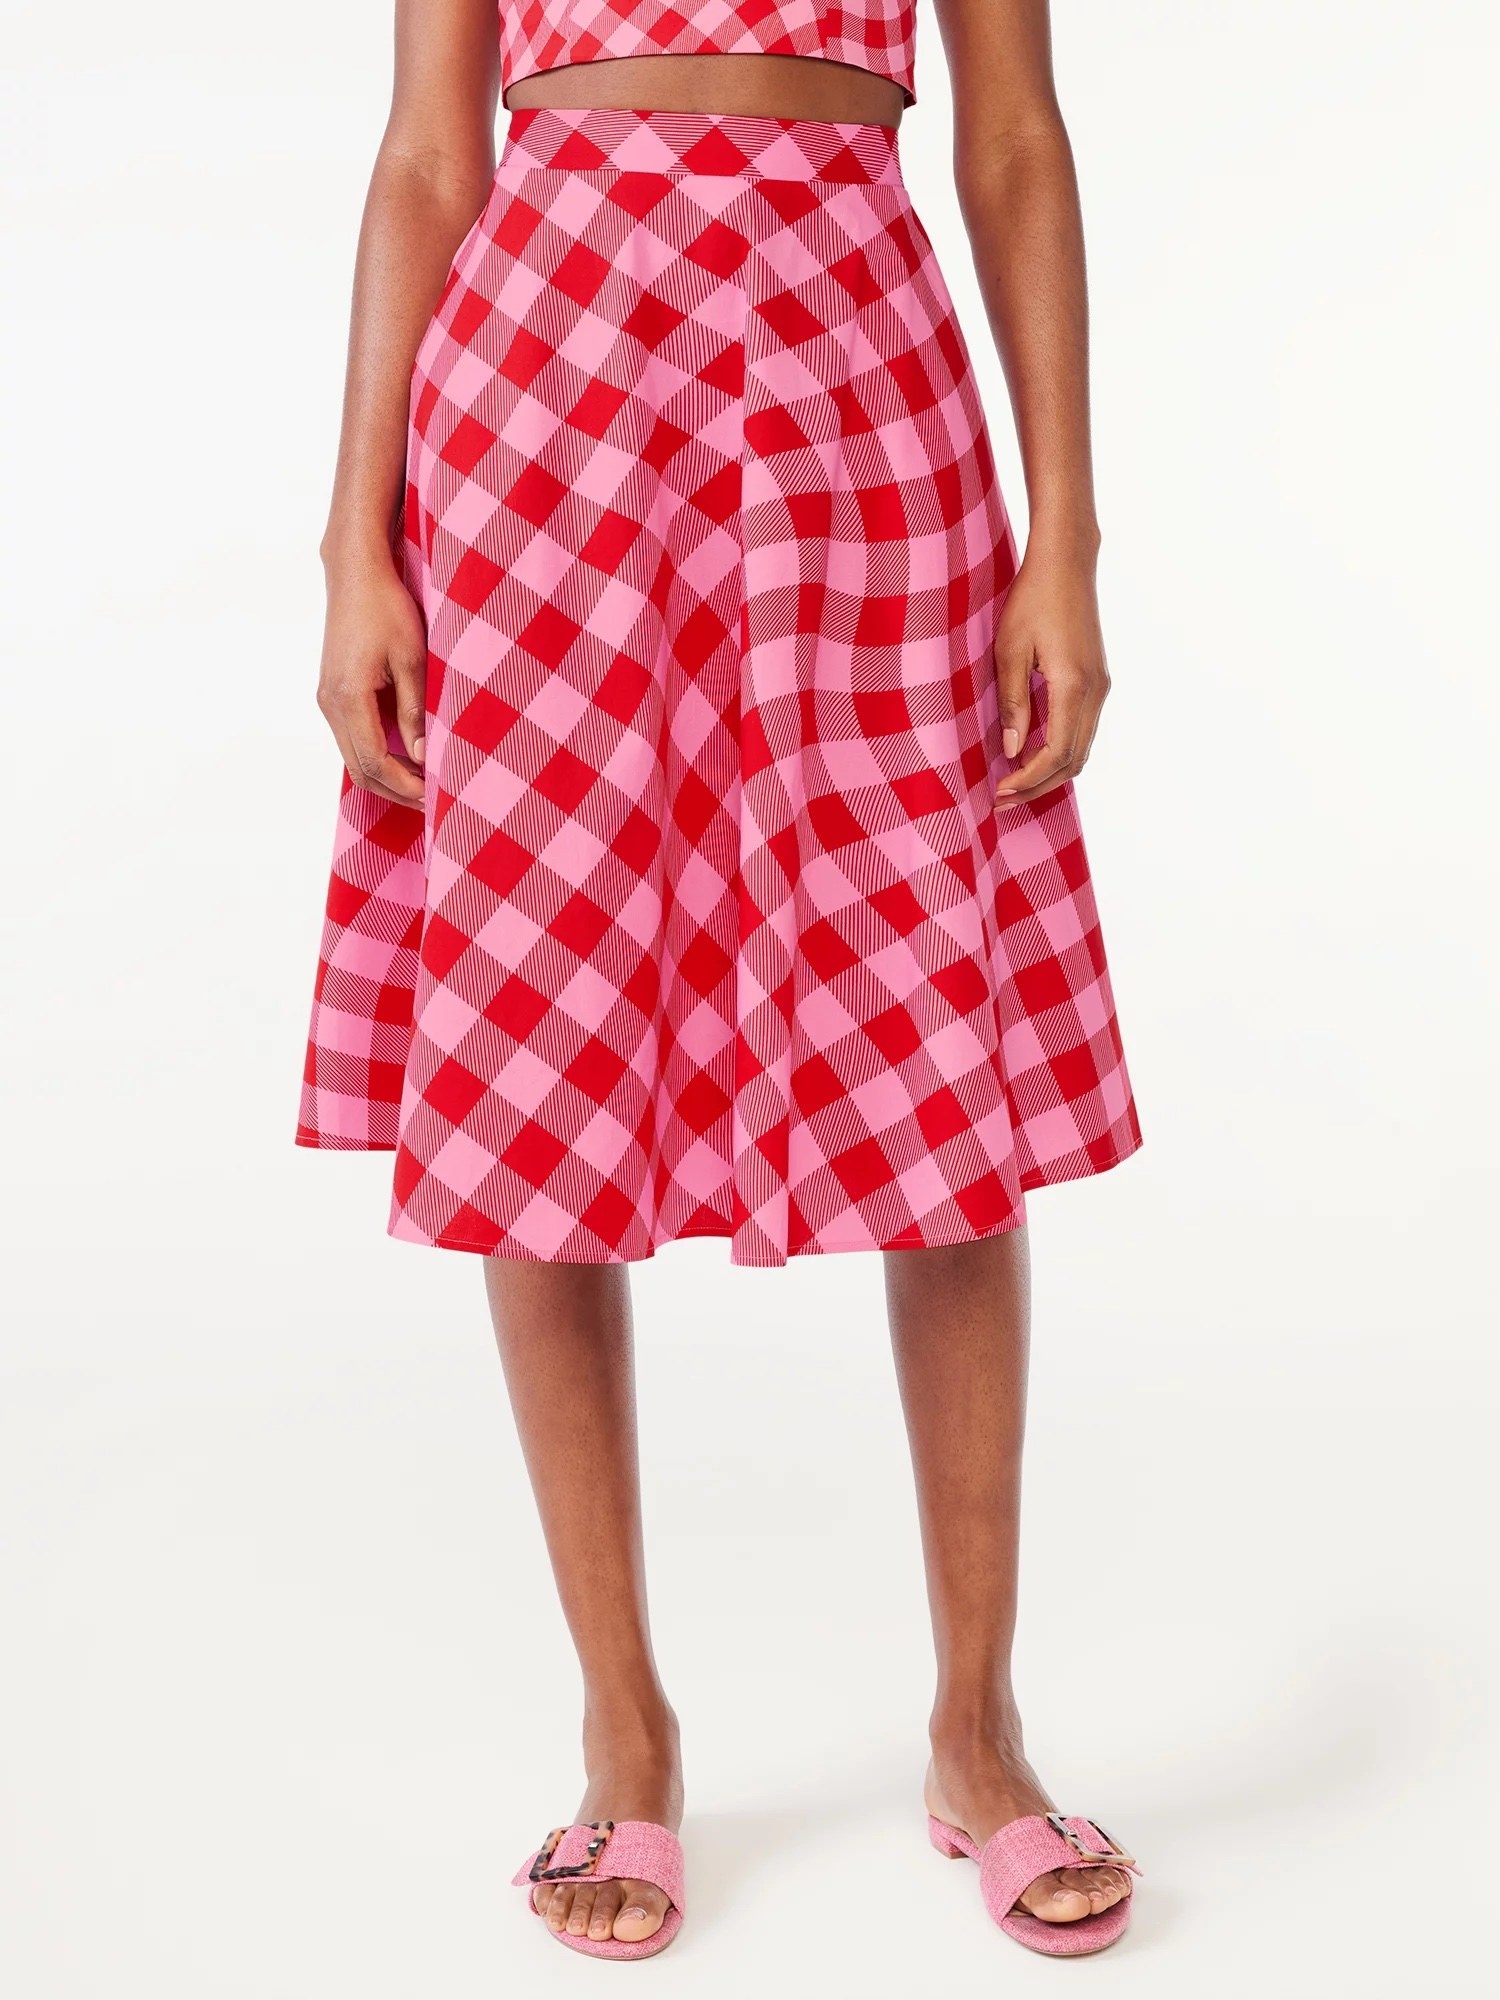 Model with a pink and red checkered skirt with matching top and pink shoes